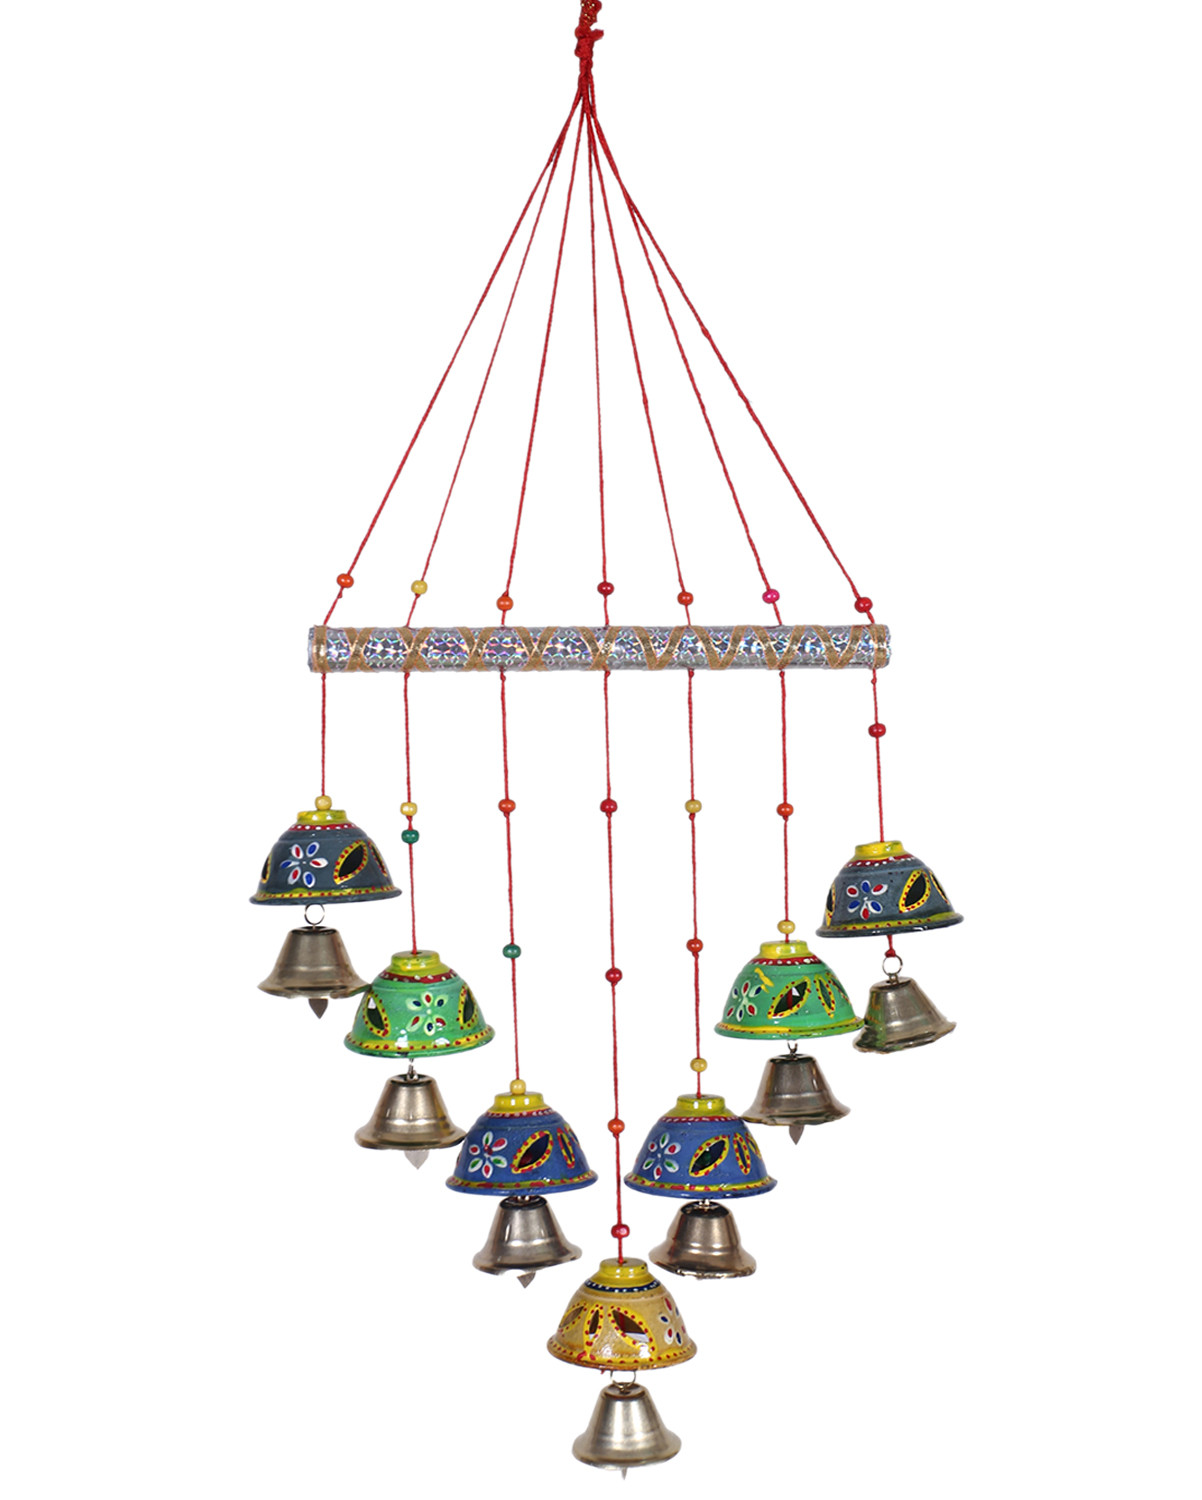 Kuber Industries Decorative Wooden Rajasthani Based Handmade Windchimes With Bells for Home & Balcony Decoration (Multicolor)